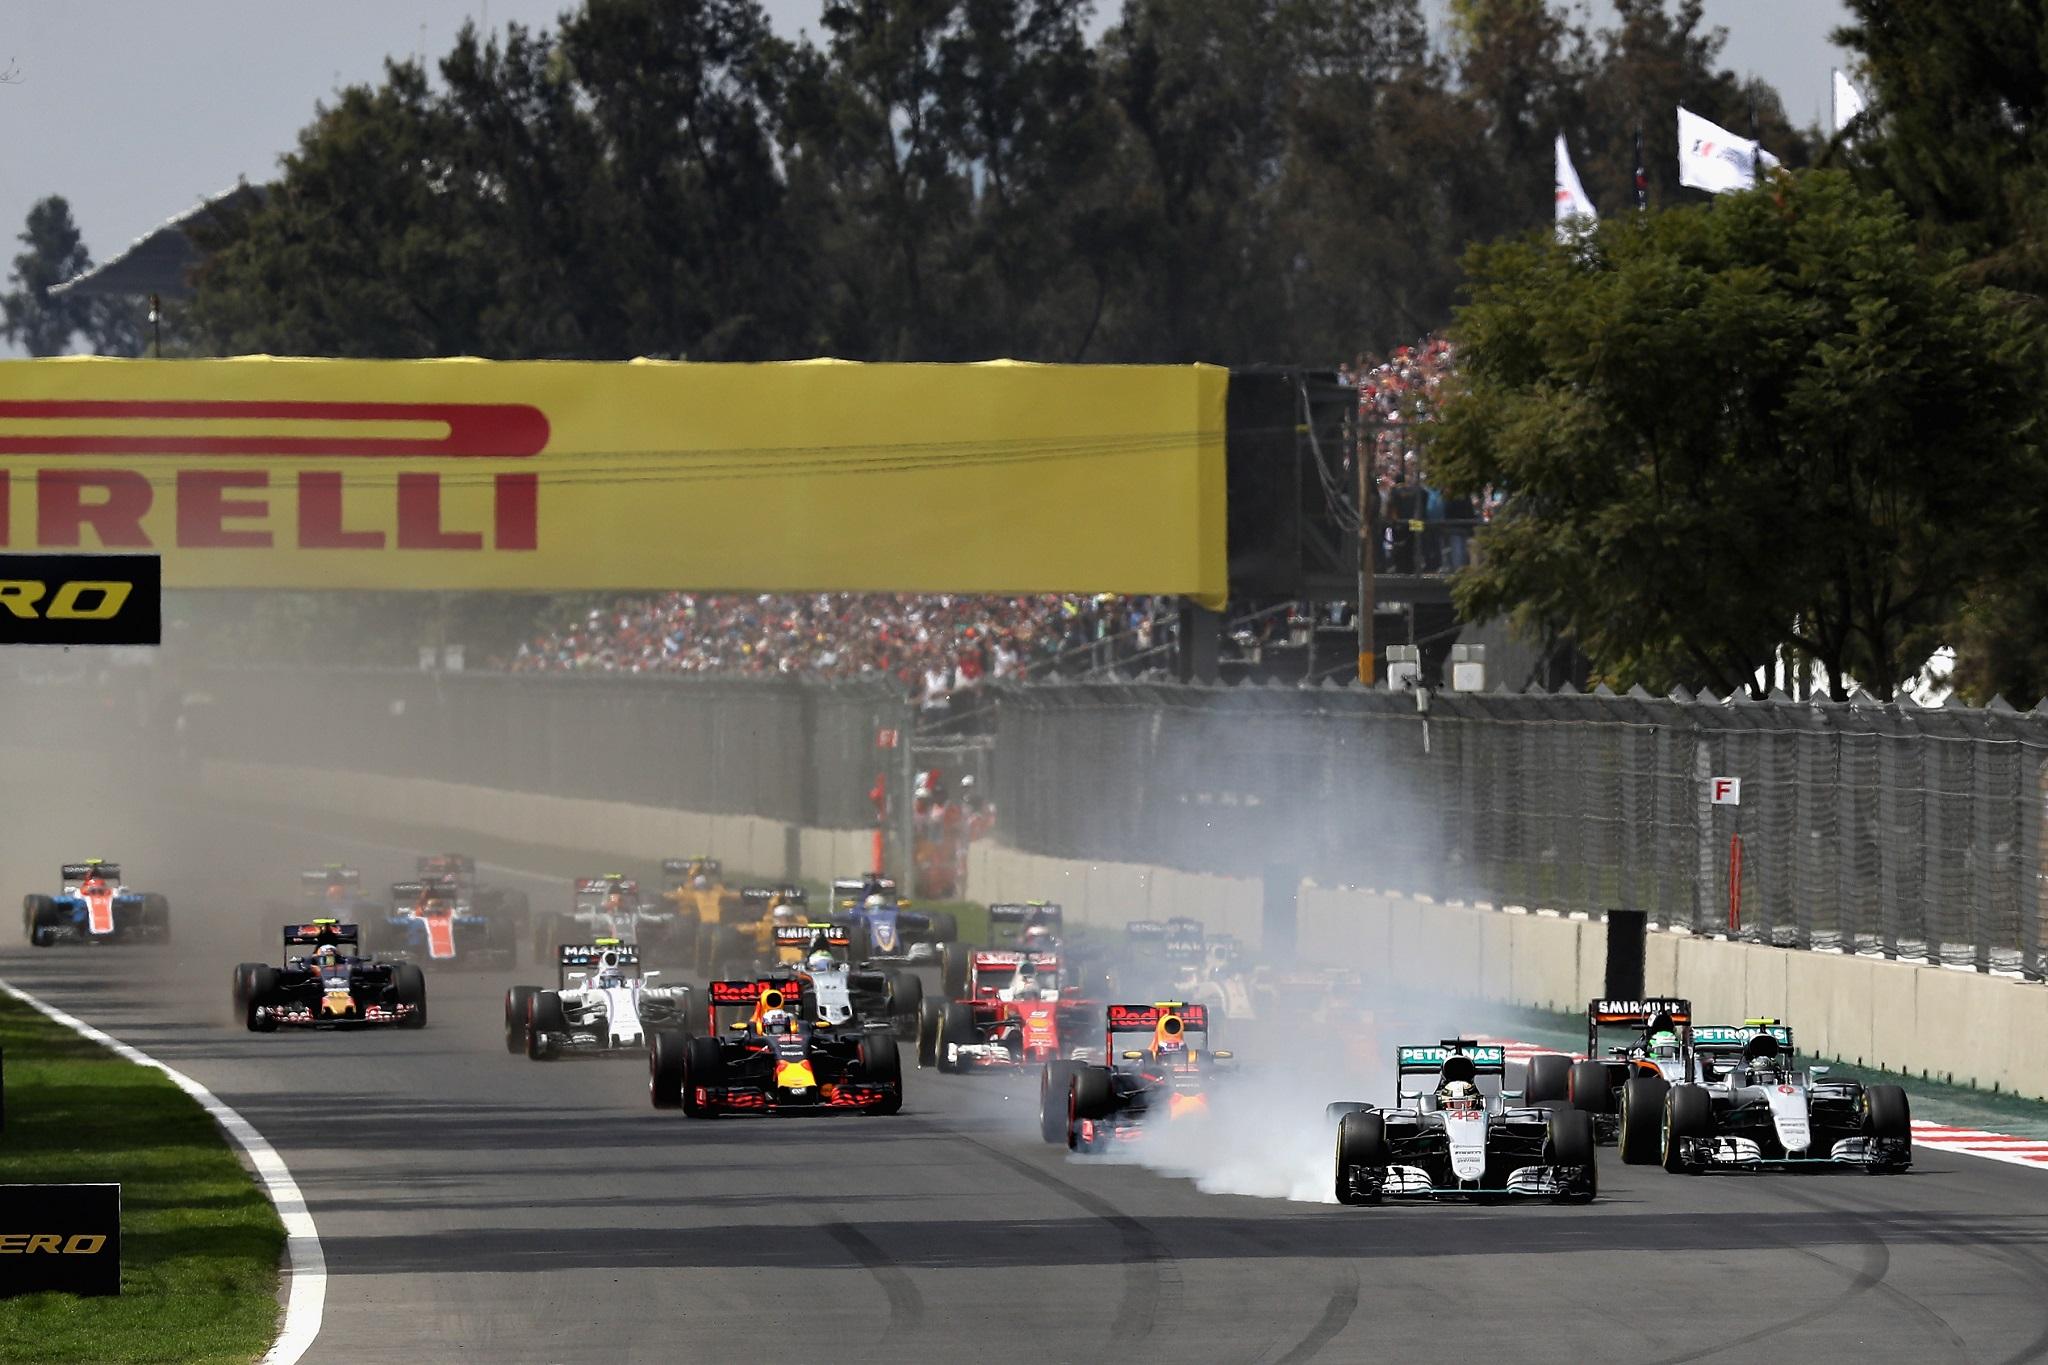 Mexico Grand Prix live Lewis Hamilton wins as Max Verstappen loses third place to Sebastian Vettel after penalty The Independent The Independent